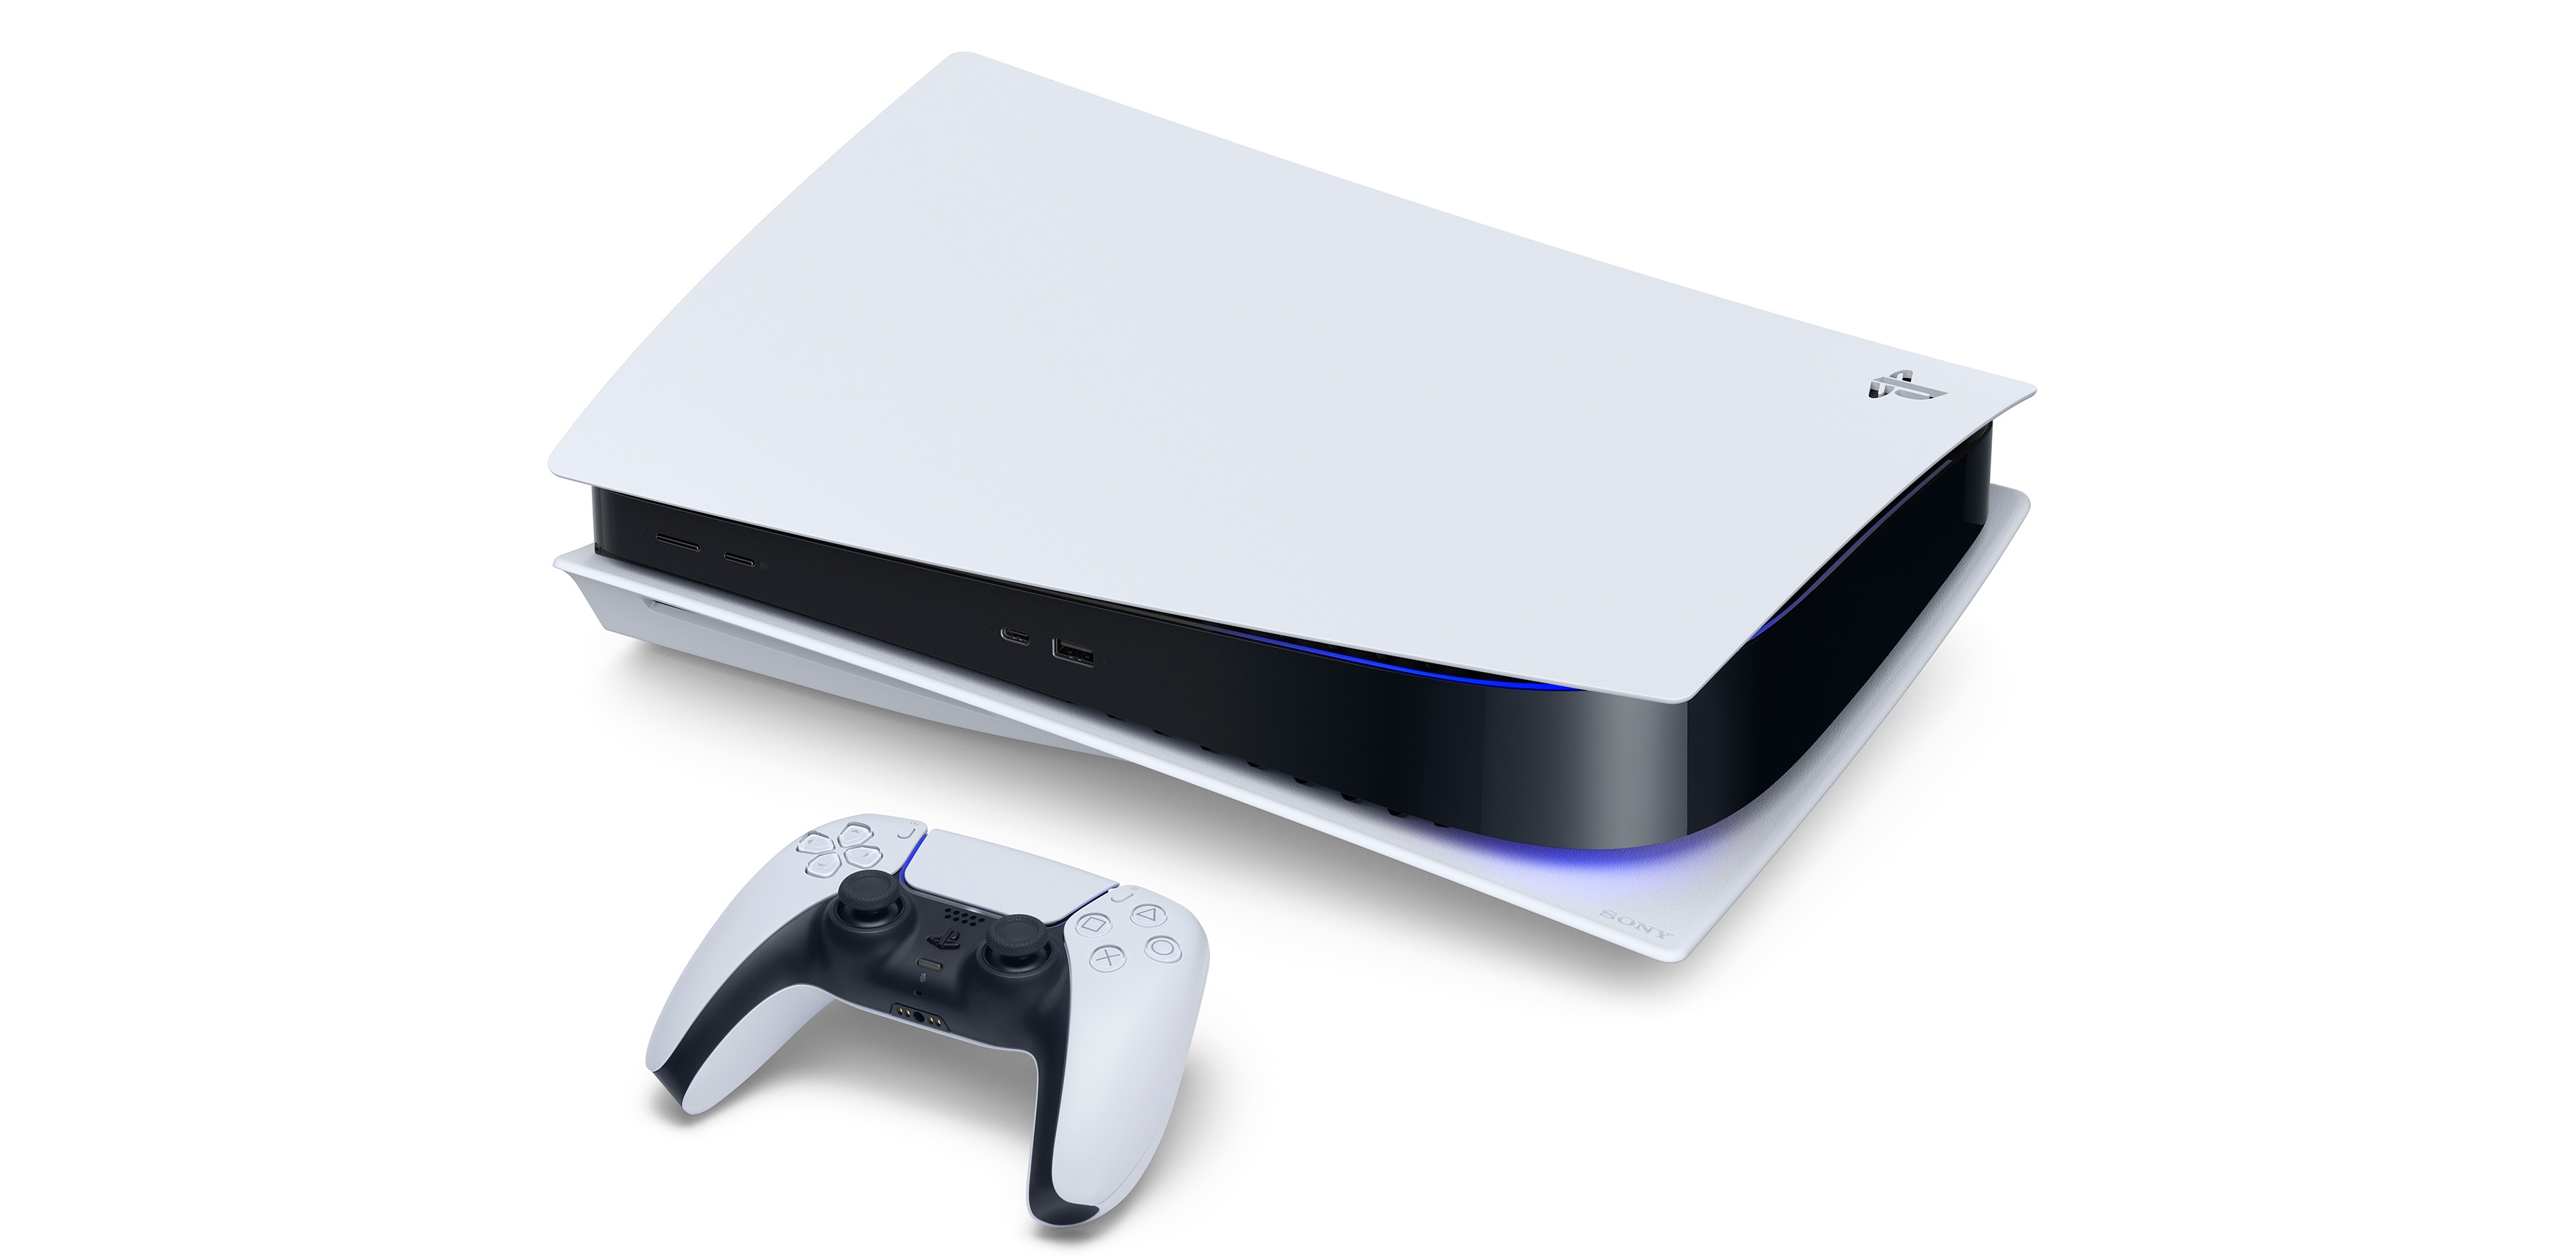 Sony: No more Free PS5 Upgrades For PS4 Games